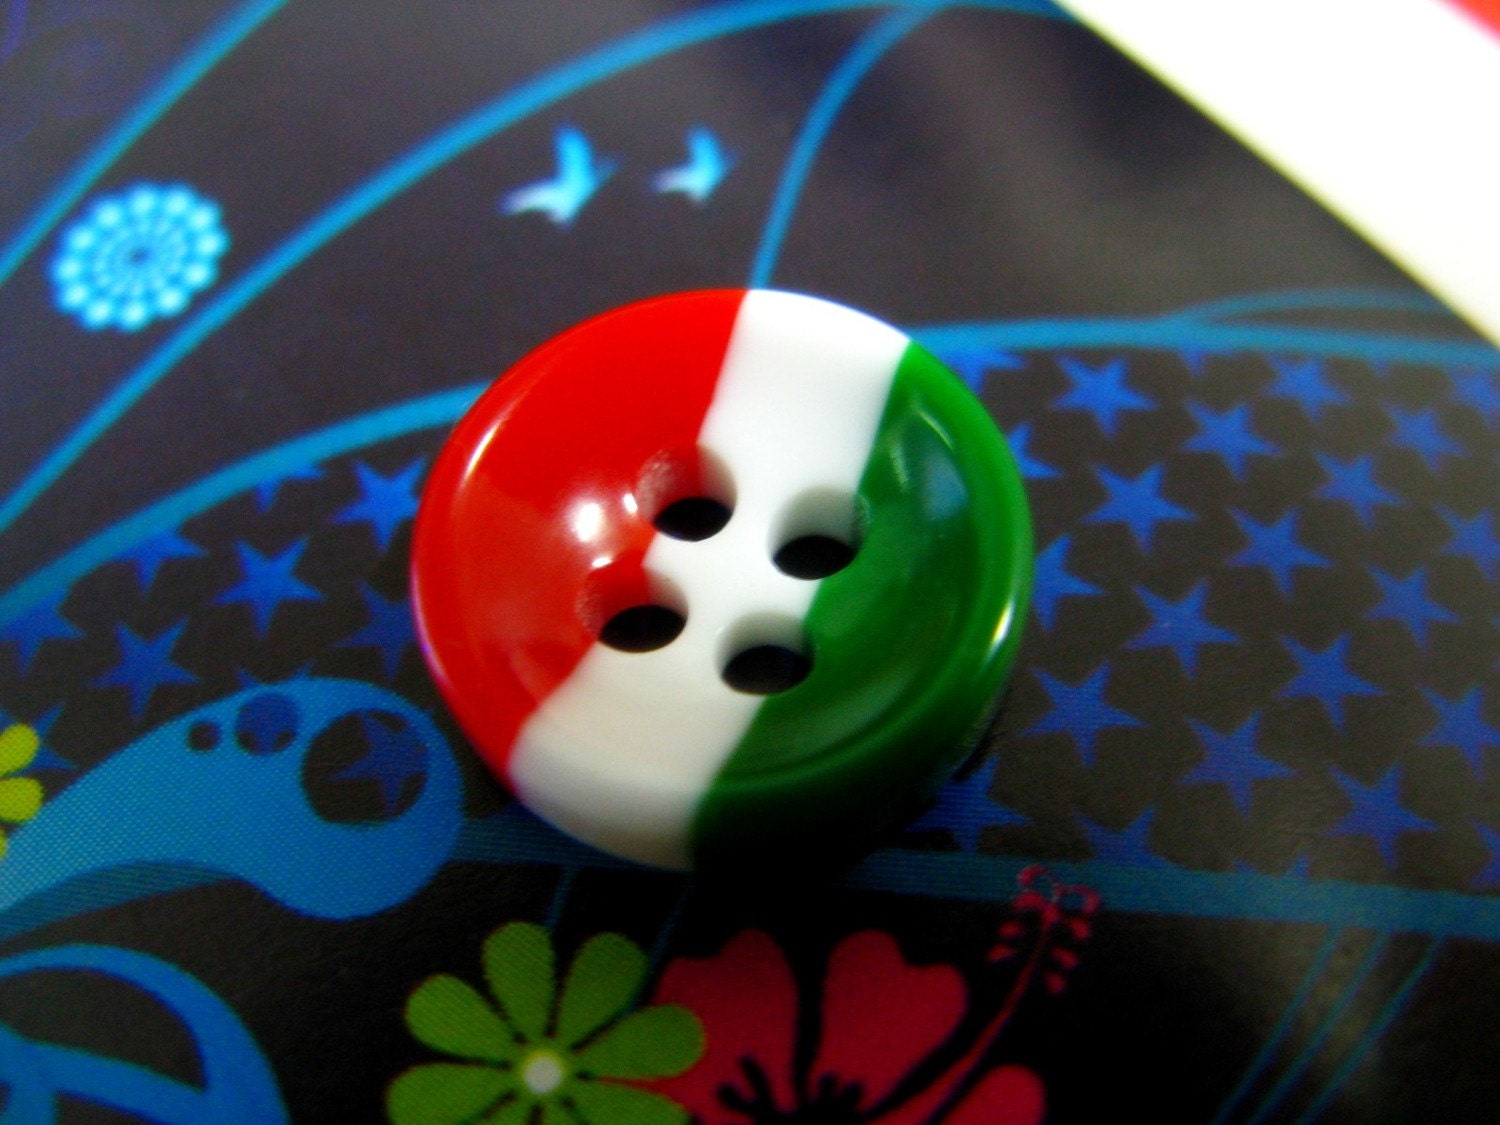 Metal Buttons Fabric: Fabrics from Italy, SKU 00038941 at $4.5